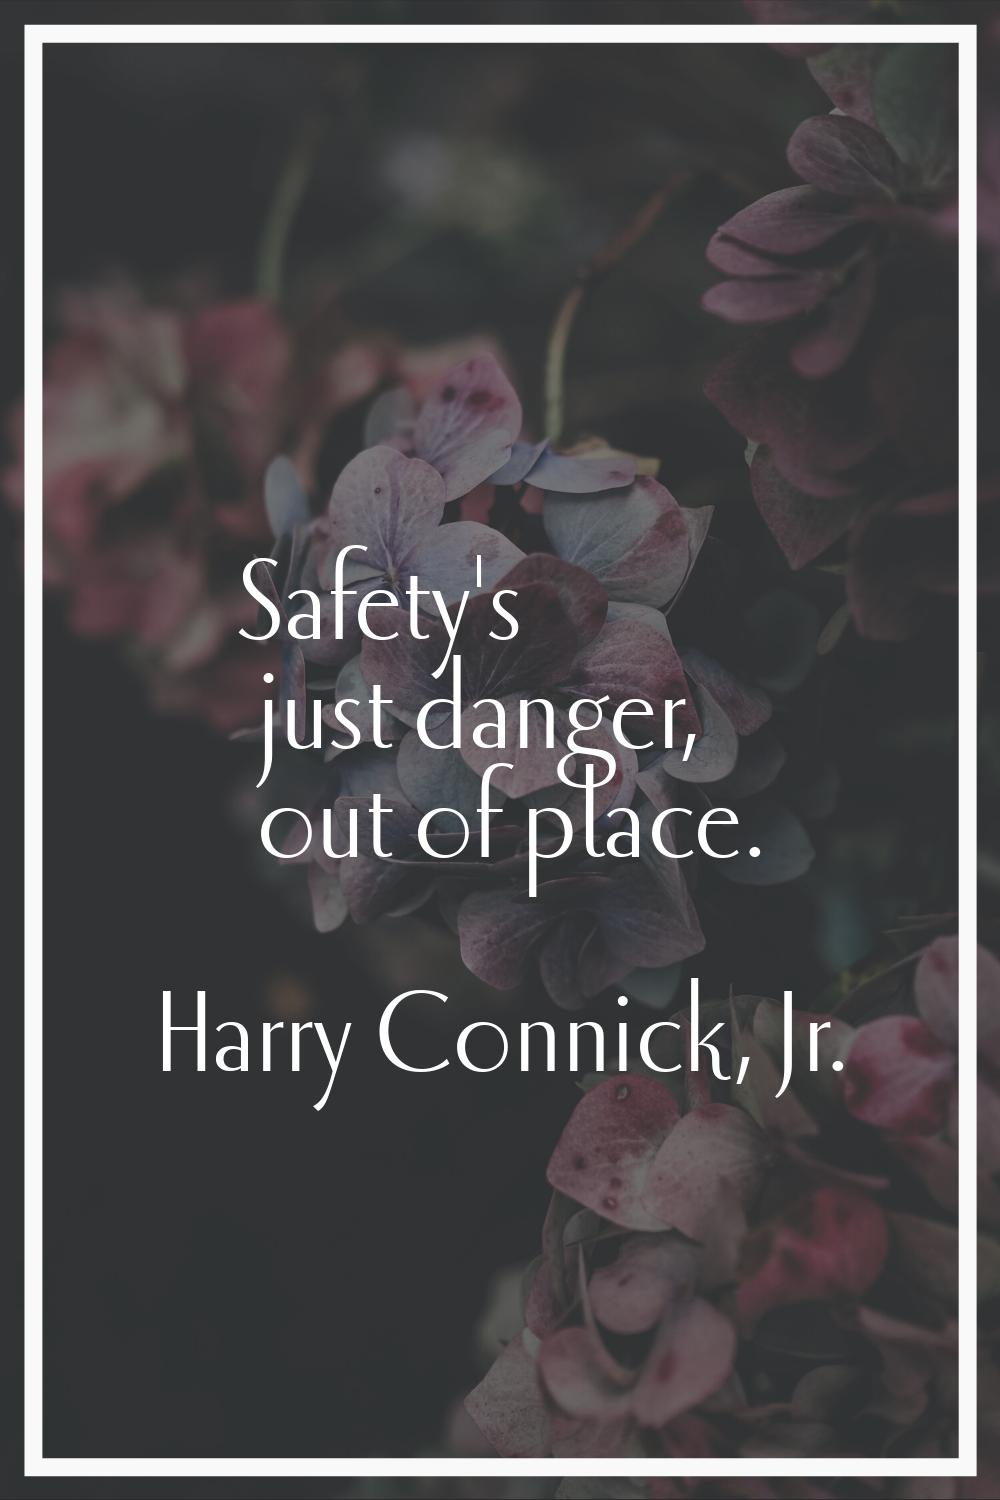 Safety's just danger, out of place.